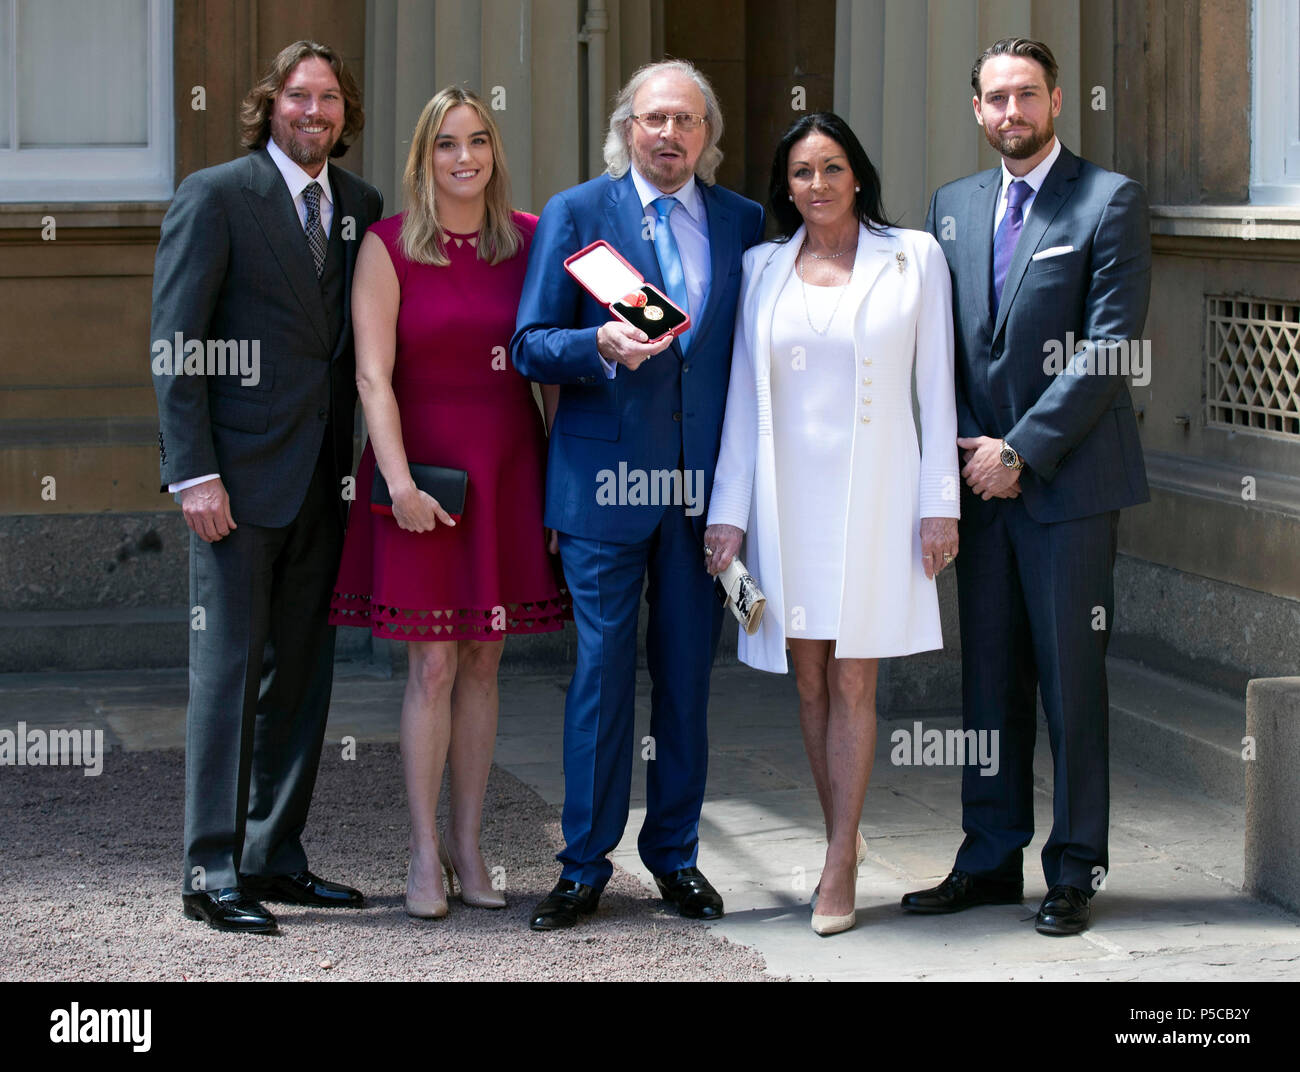 Singer and songwriter Barry Gibb, with his wife, Linda and children, Michael (right), Alexandra and Ashley (left) at Buckingham Palace, London, after he was knighted by the Prince of Wales during an investiture ceremony. Stock Photo